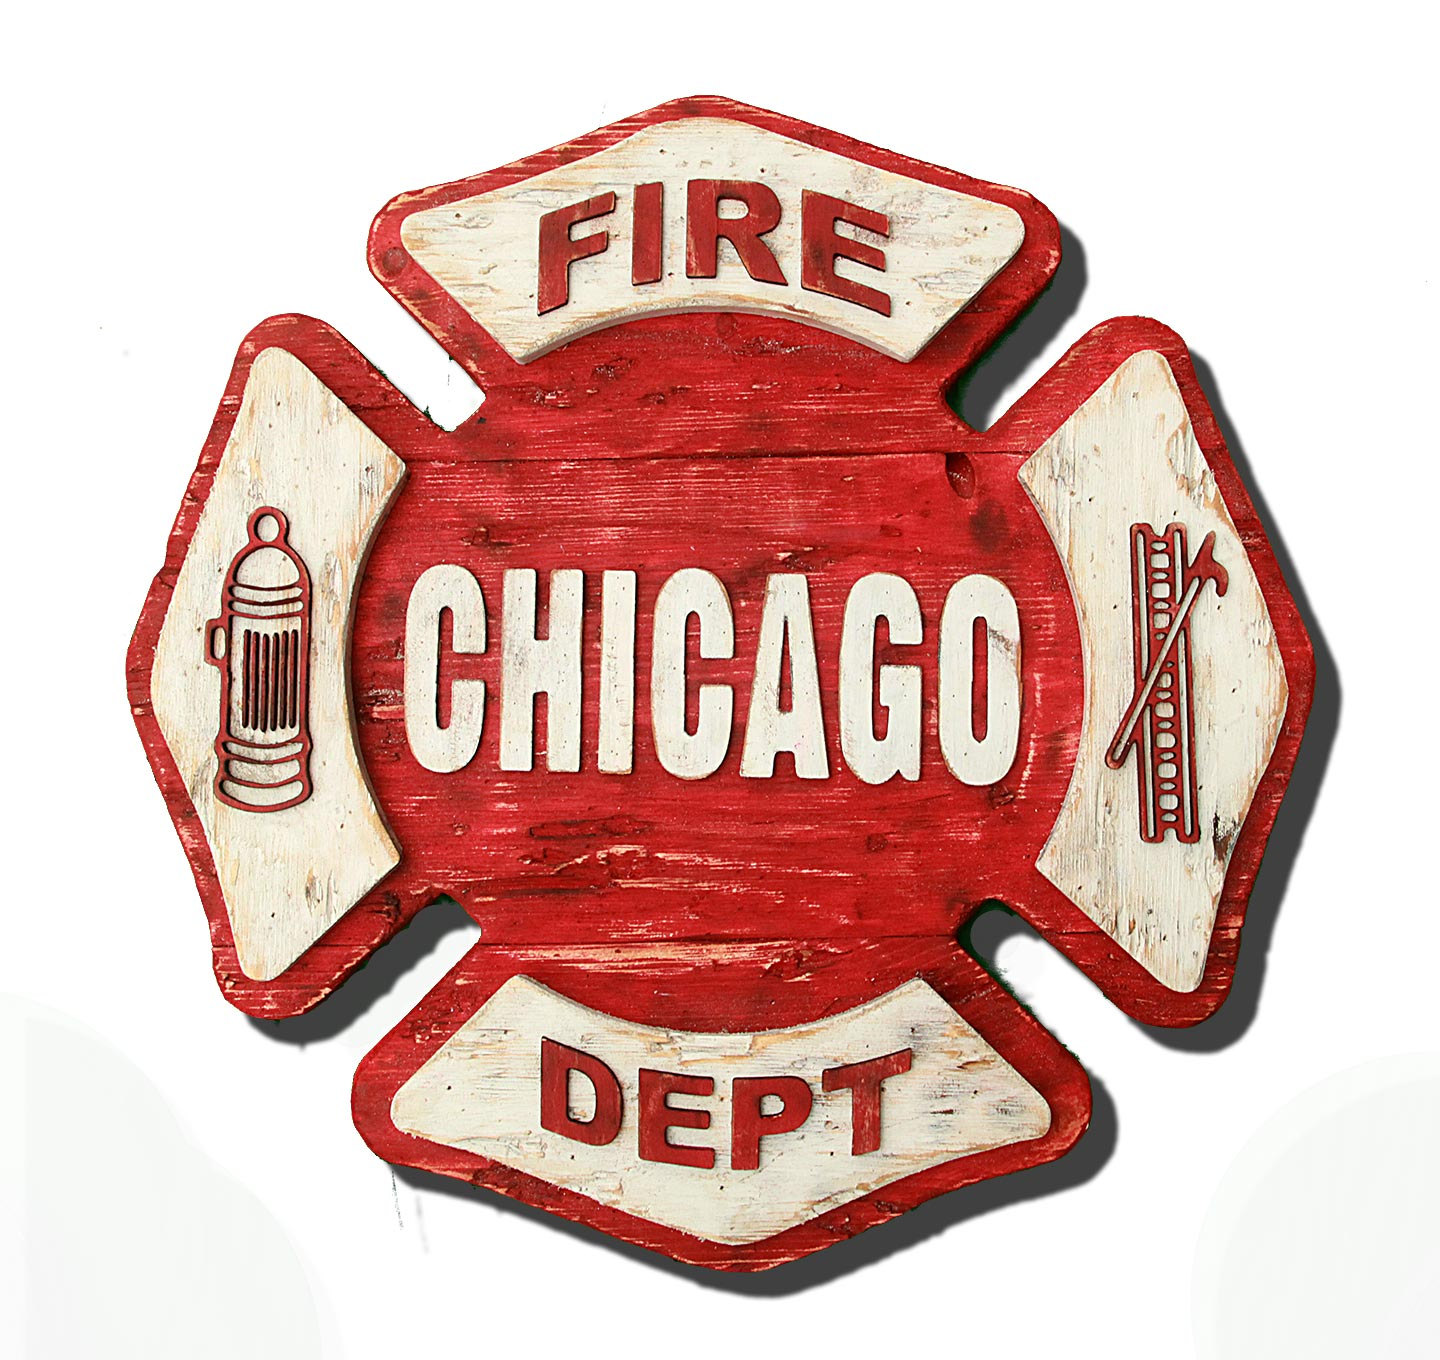 Personalized Maltese Fire Dept Sign Handmade reclaimed wood sign, vintage, art, recycled, Chicago Fire Department, Wall art, Man Cave, Red